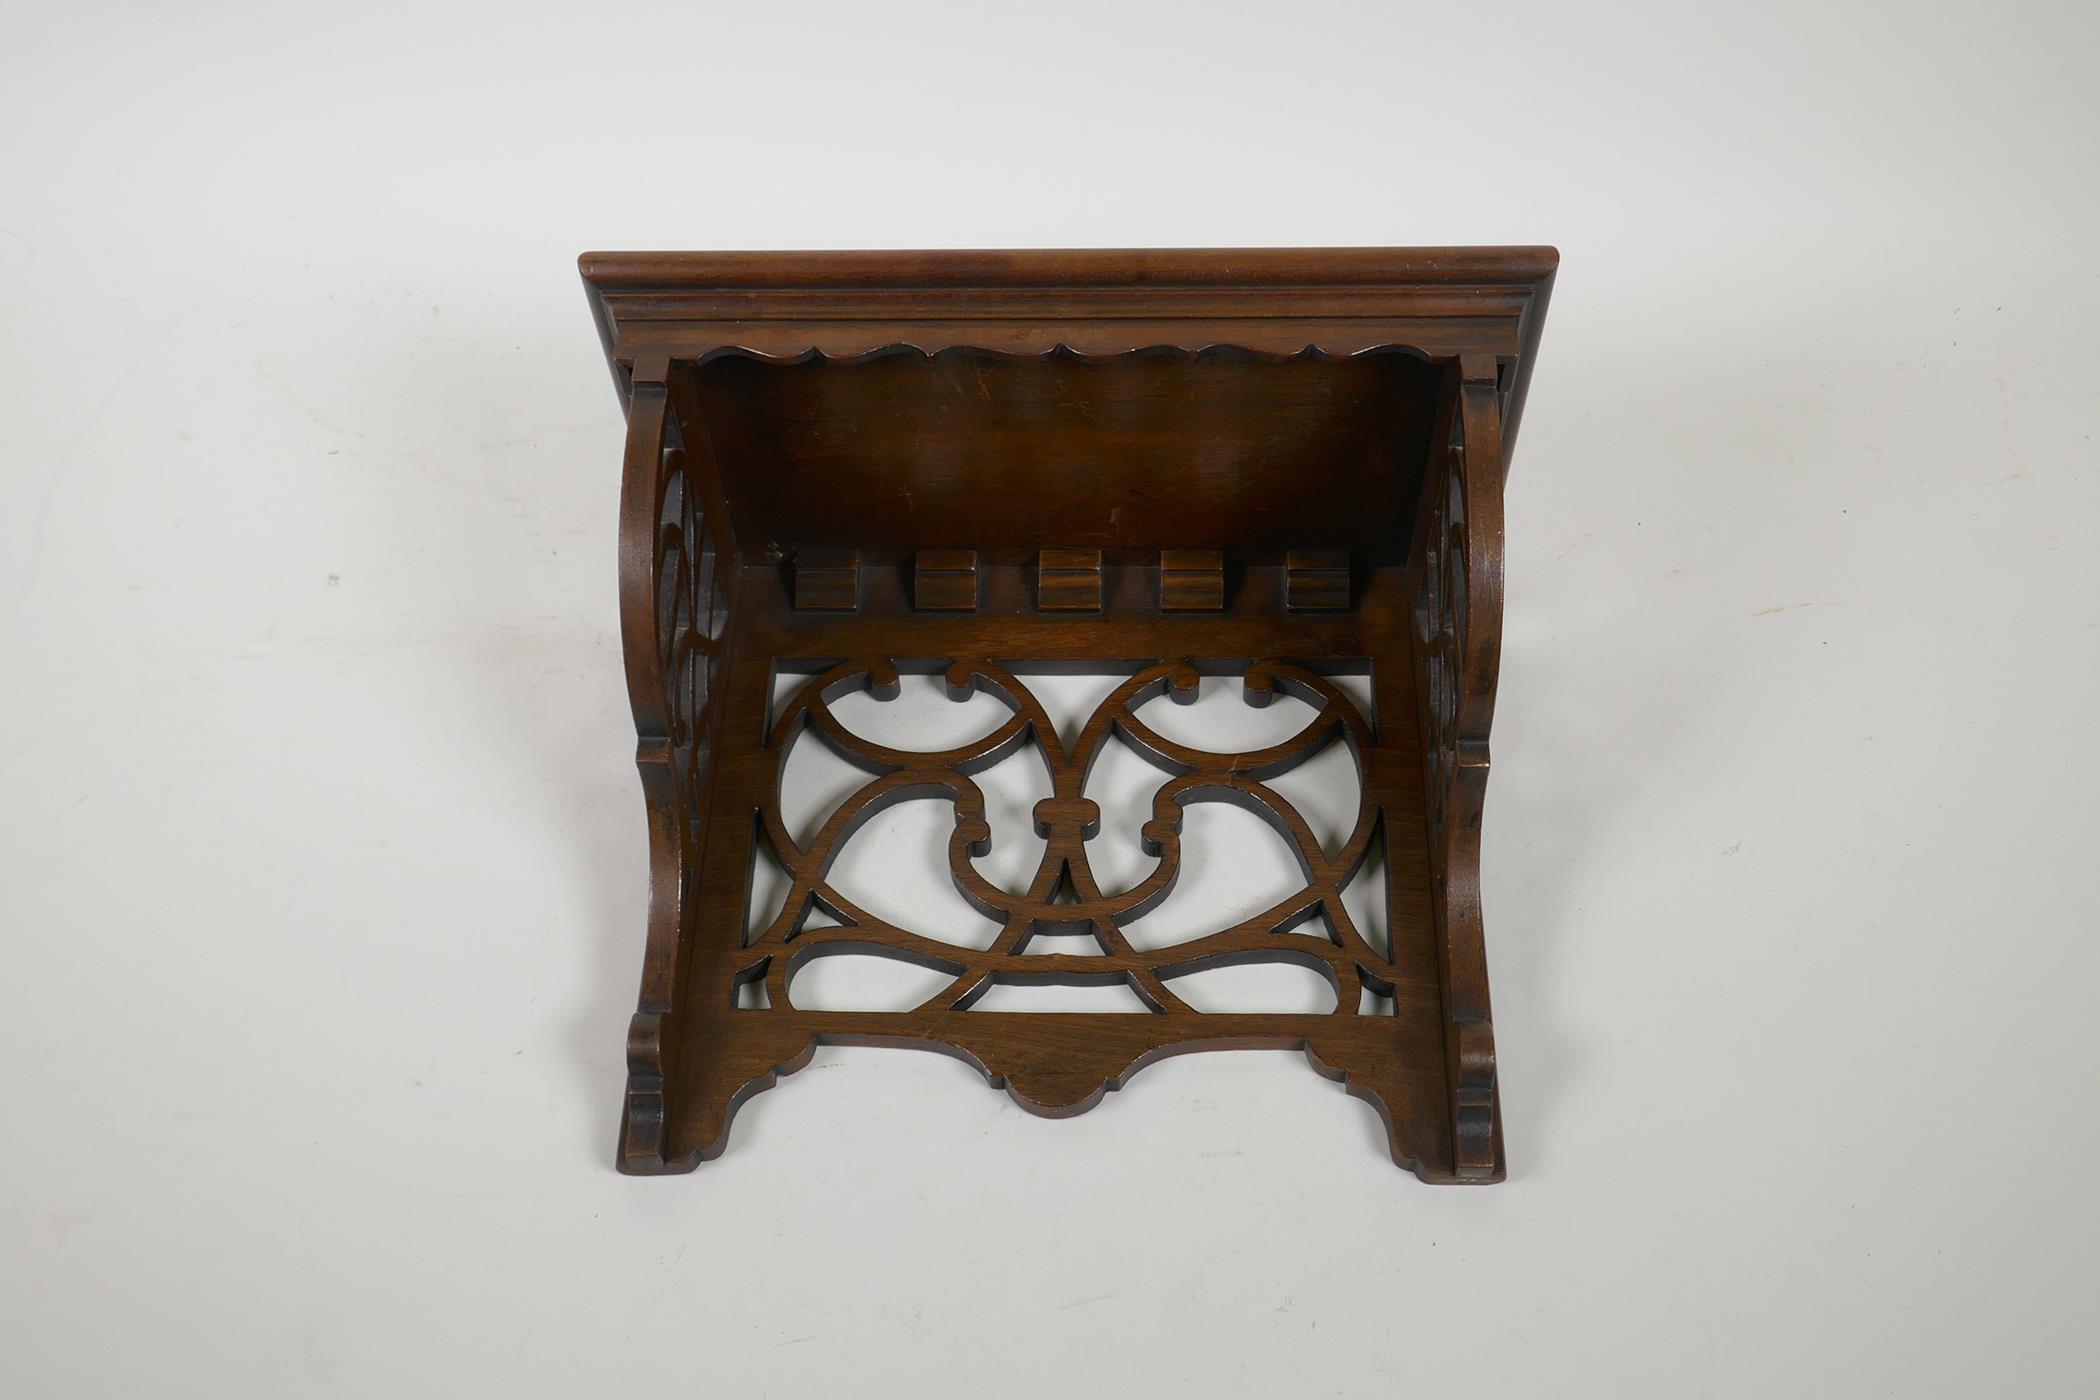 A rosewood clock bracket with pierced decoration, 10" x 5" x 9" high - Image 2 of 3